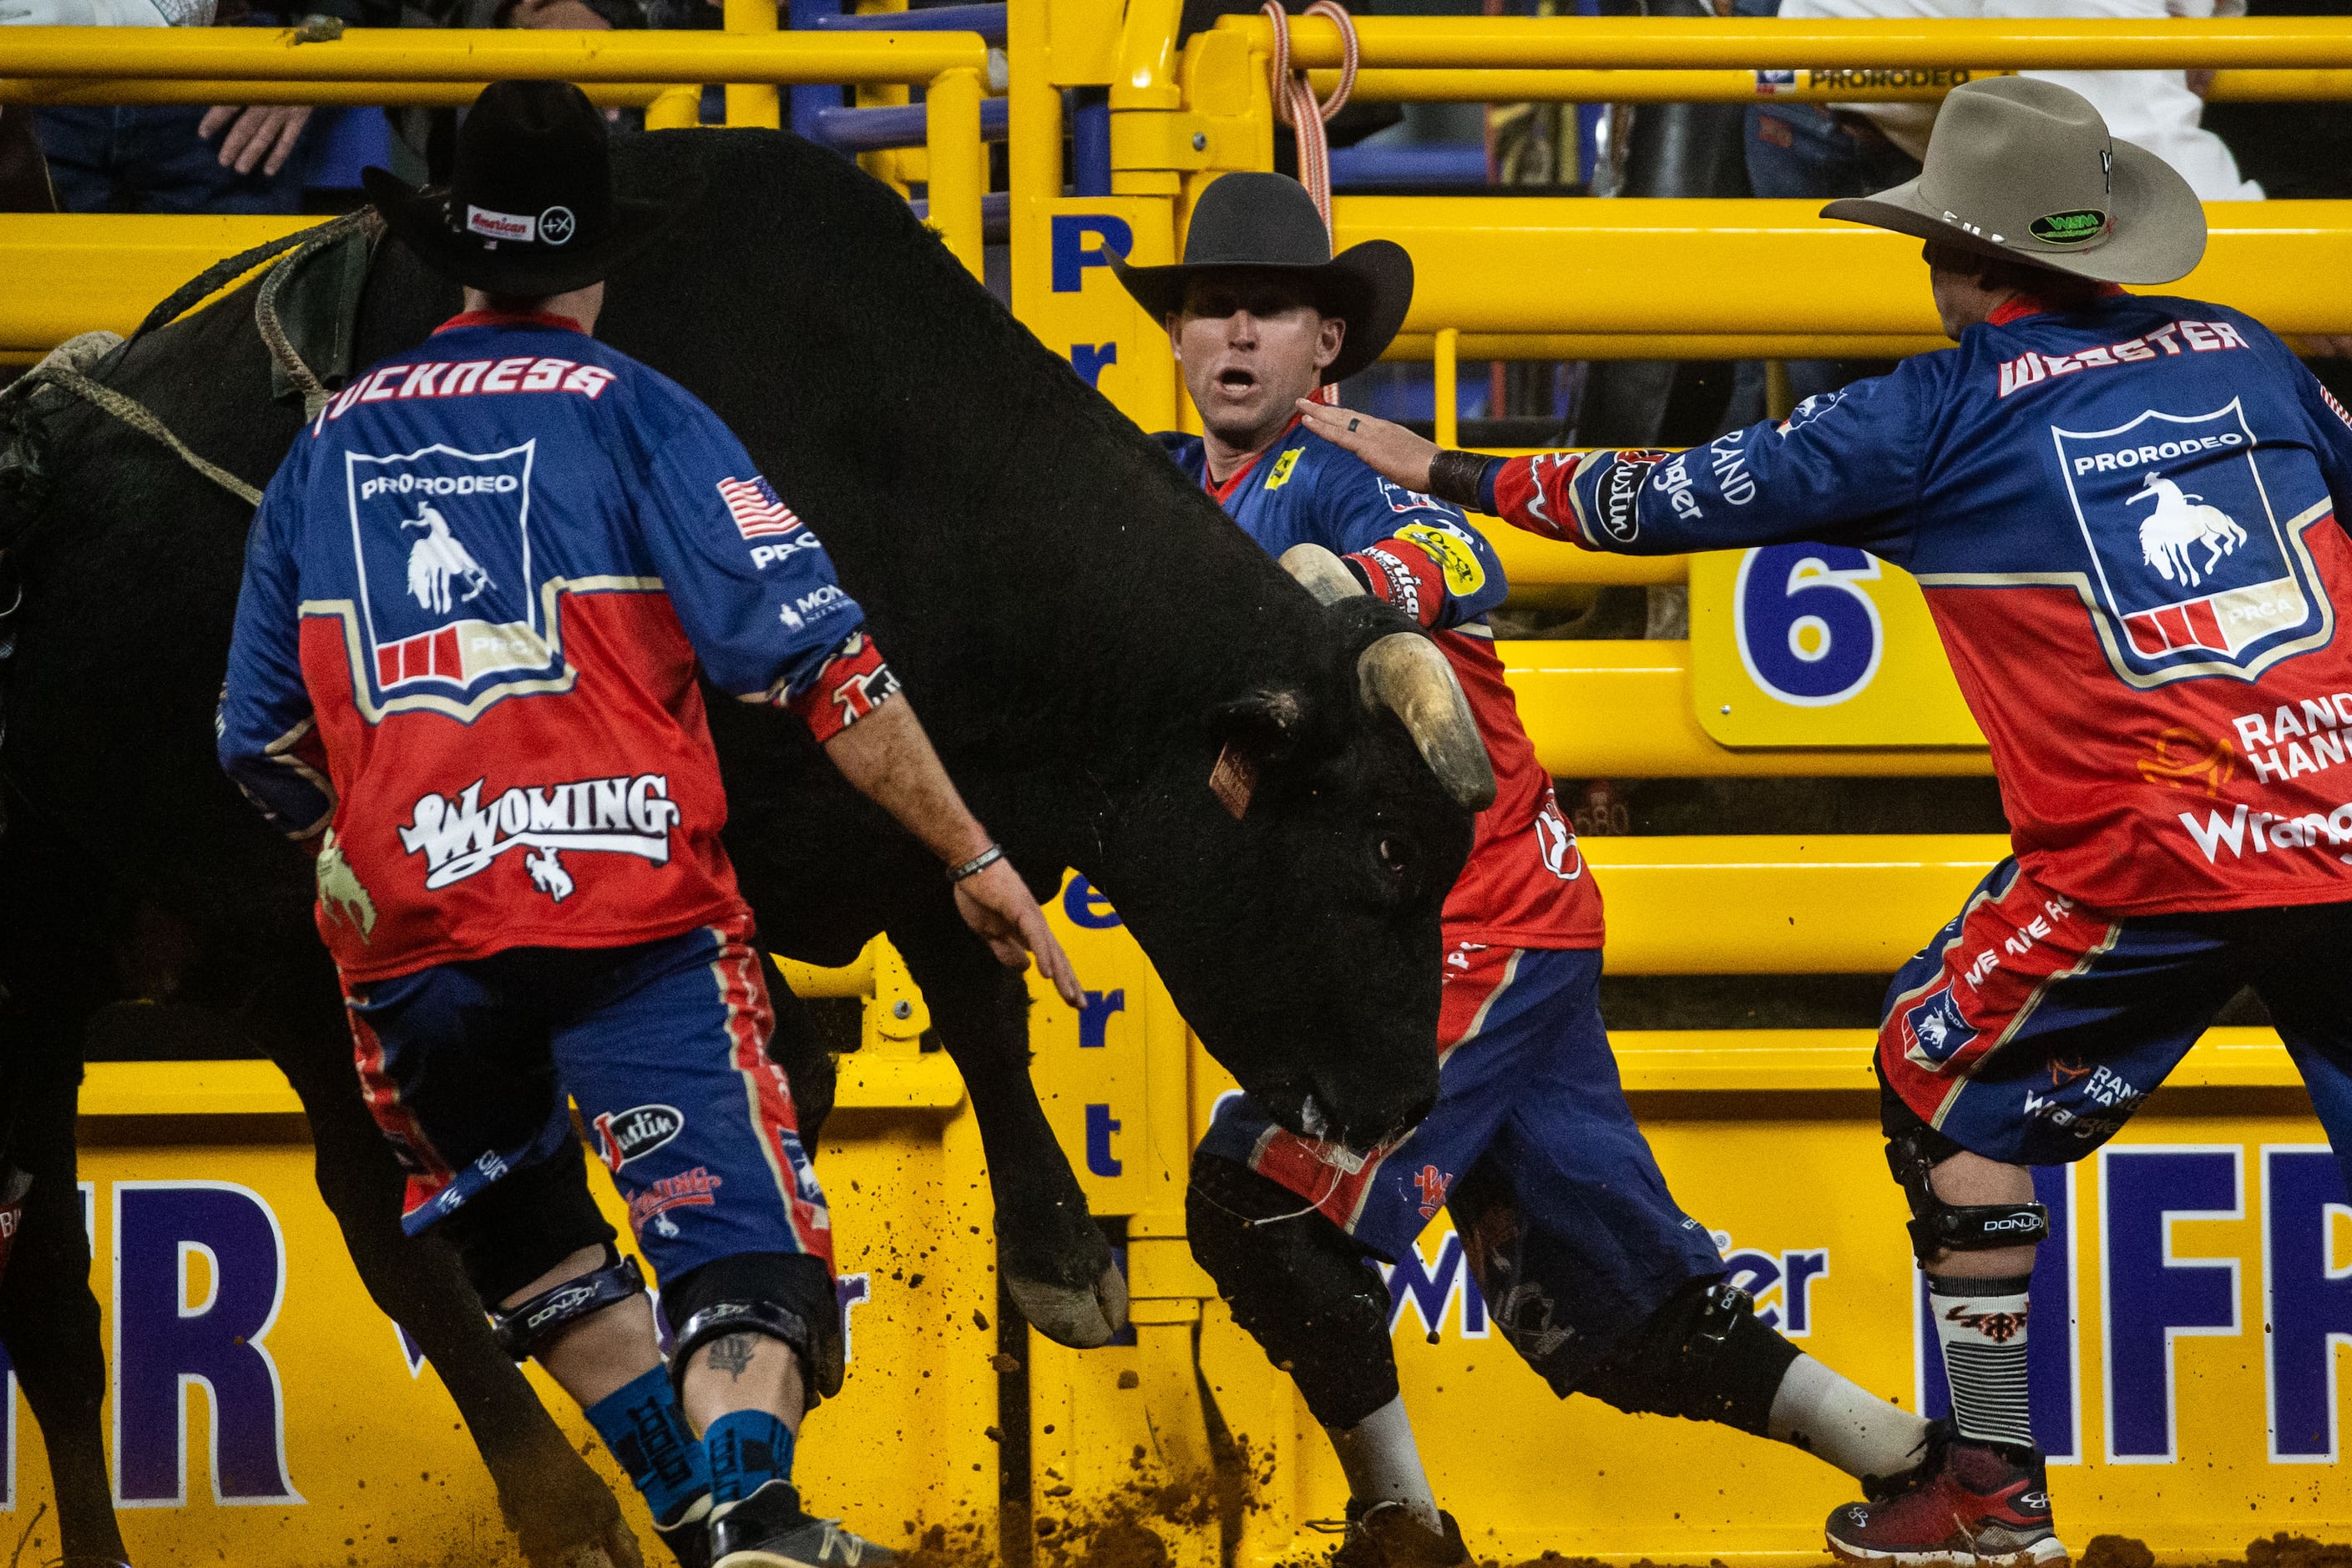 Cody Webster becomes official bullfighter at PBR World Finals in Ft. Worth